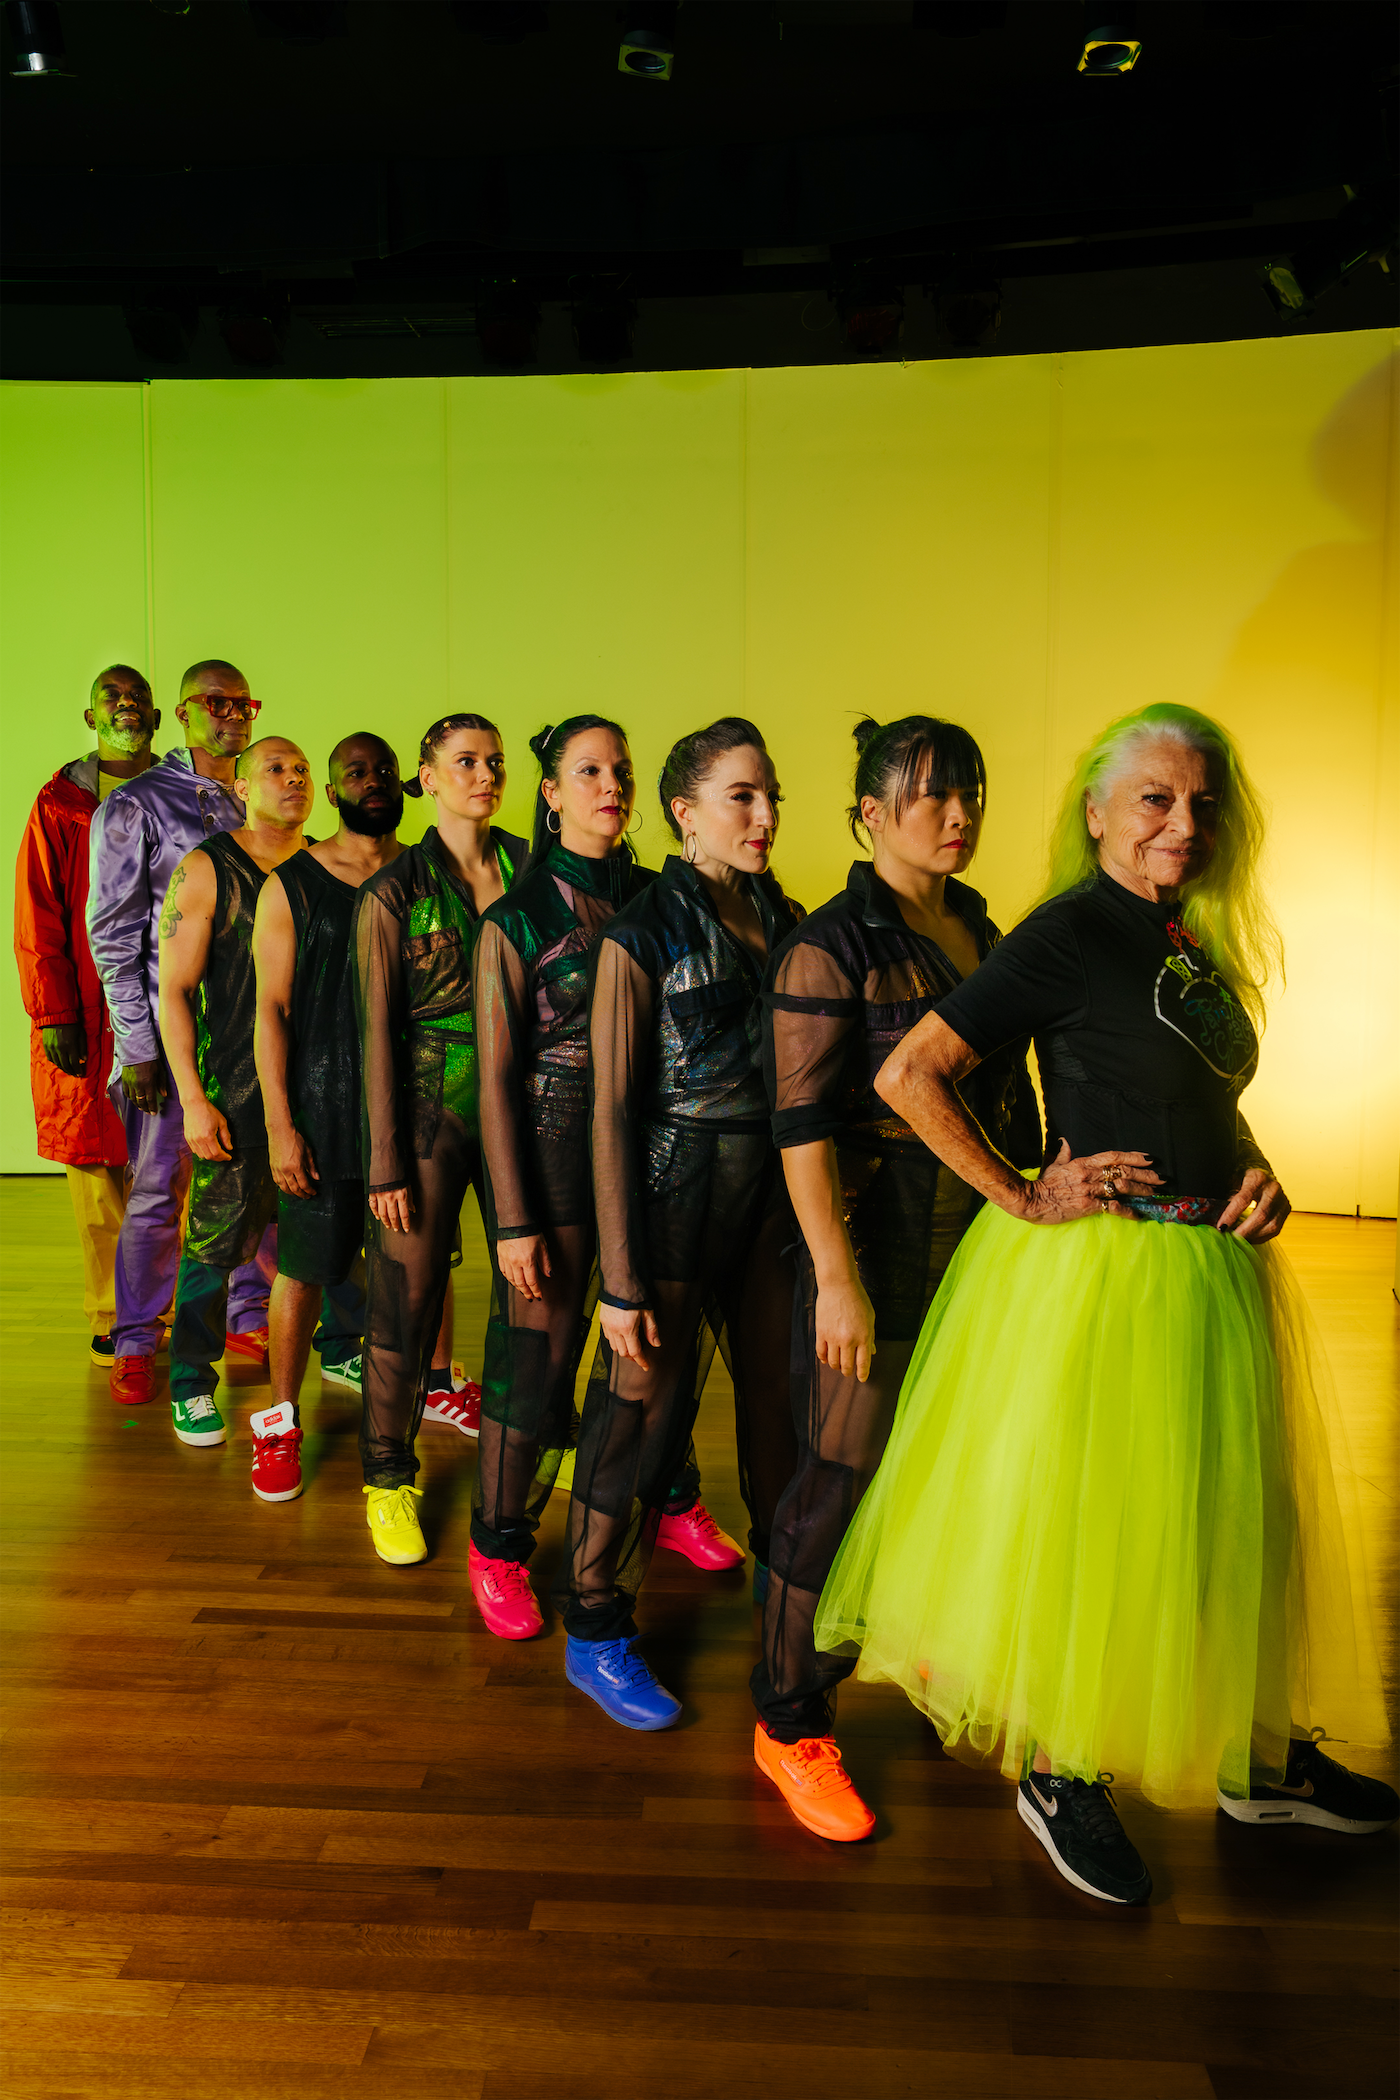 Dancers on stage with bright yellow and green background